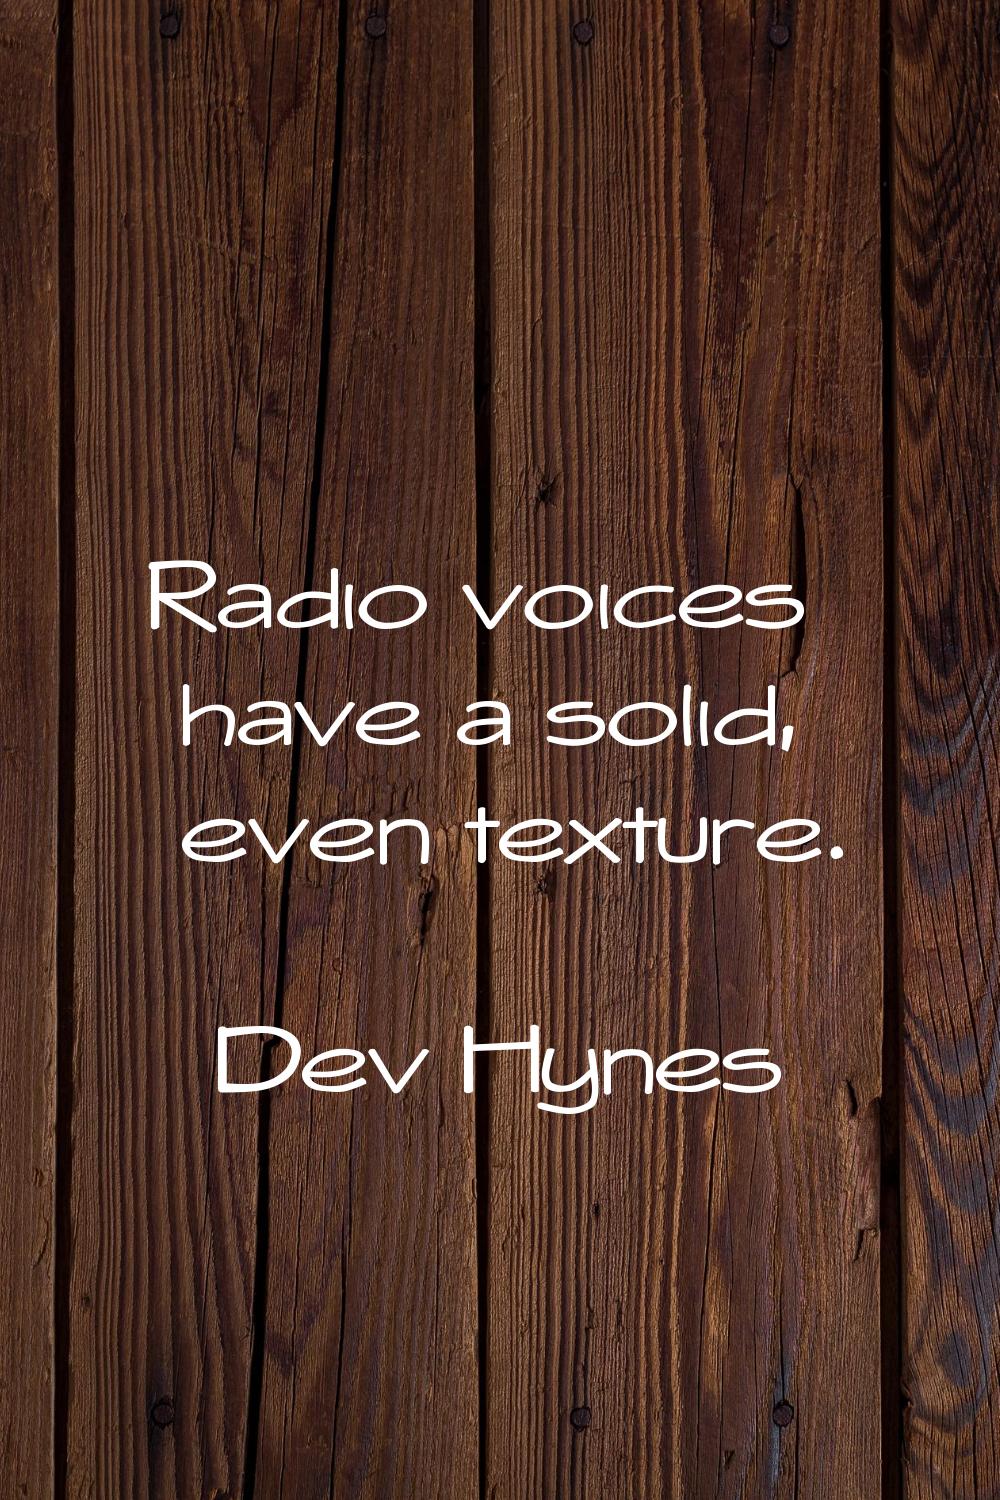 Radio voices have a solid, even texture.